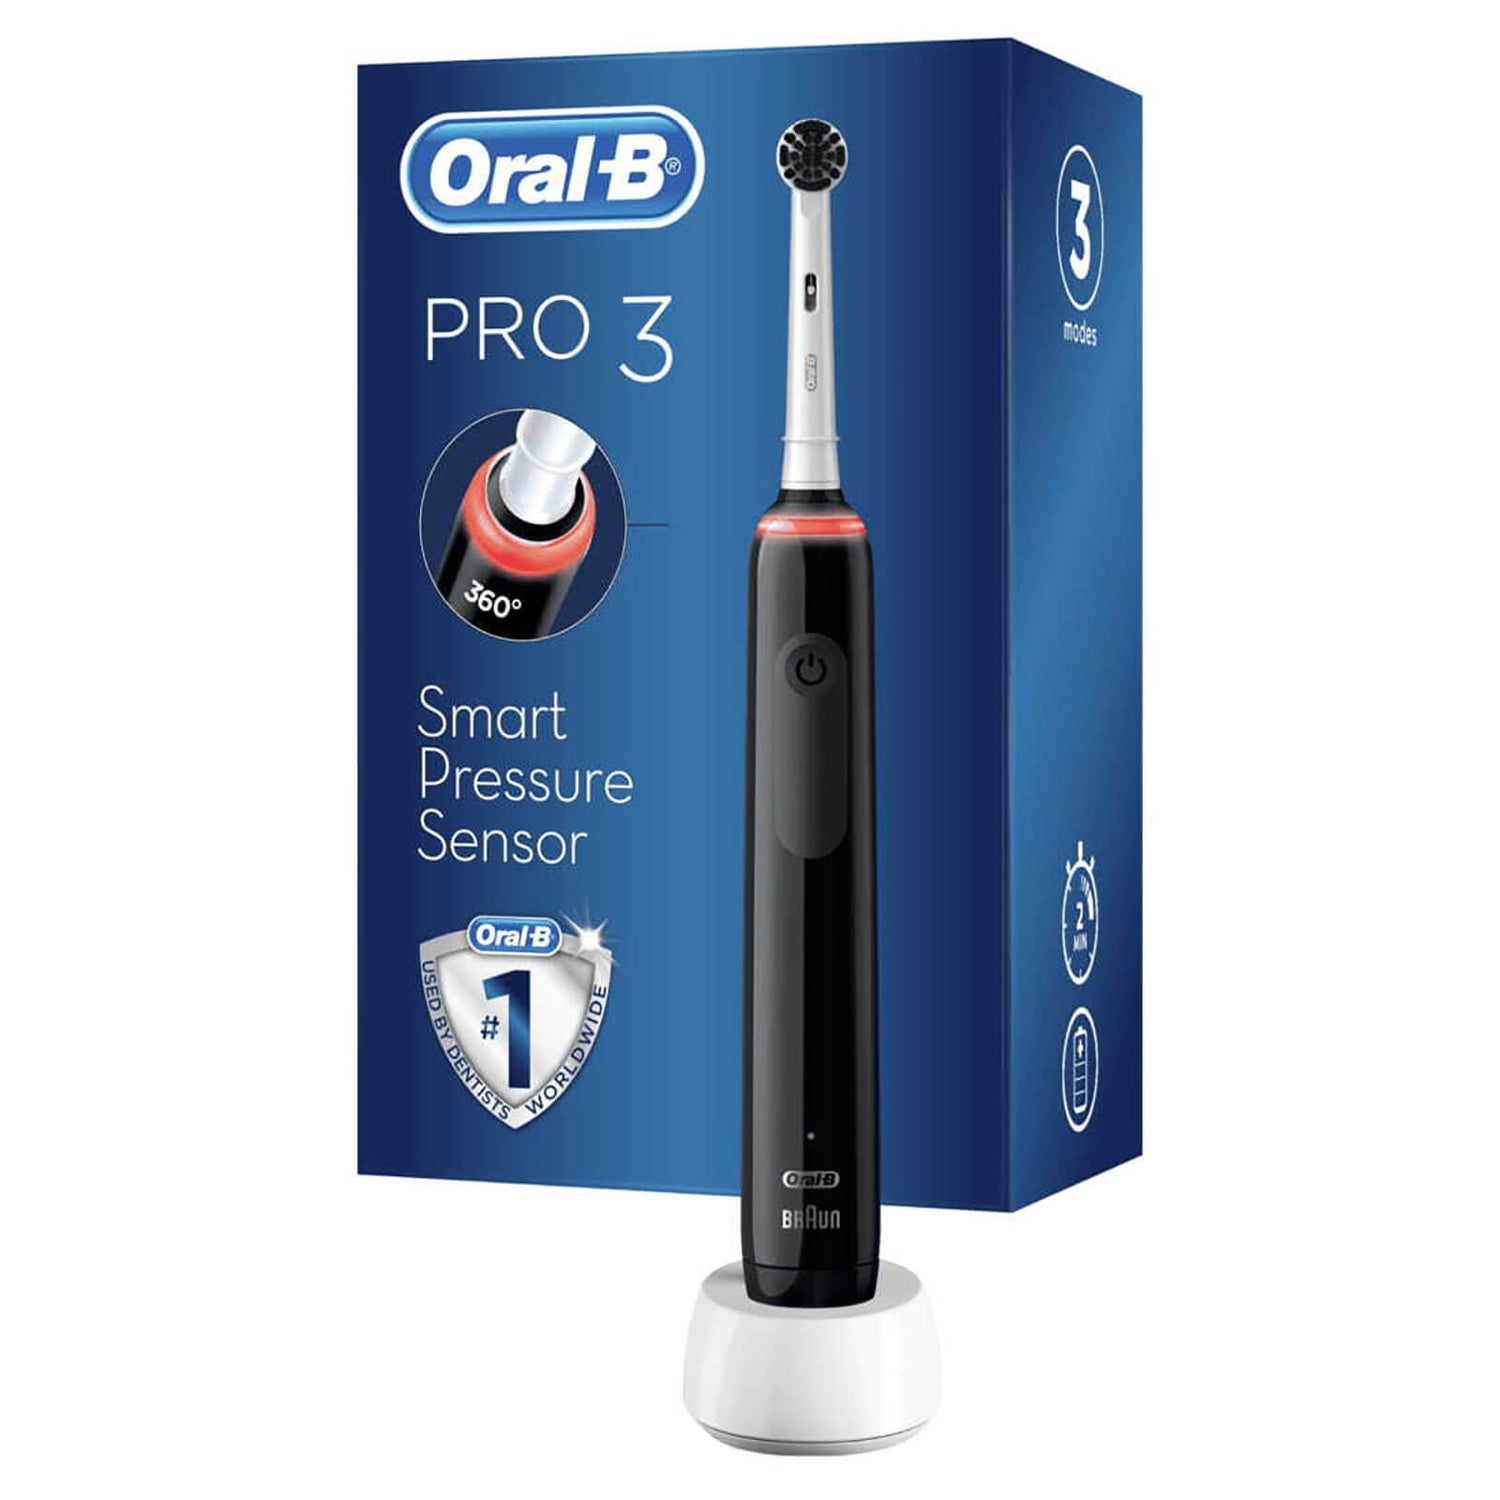 Oral-B Pro 3000 - Black Electric Toothbrush with Charcoal Infused Bristles